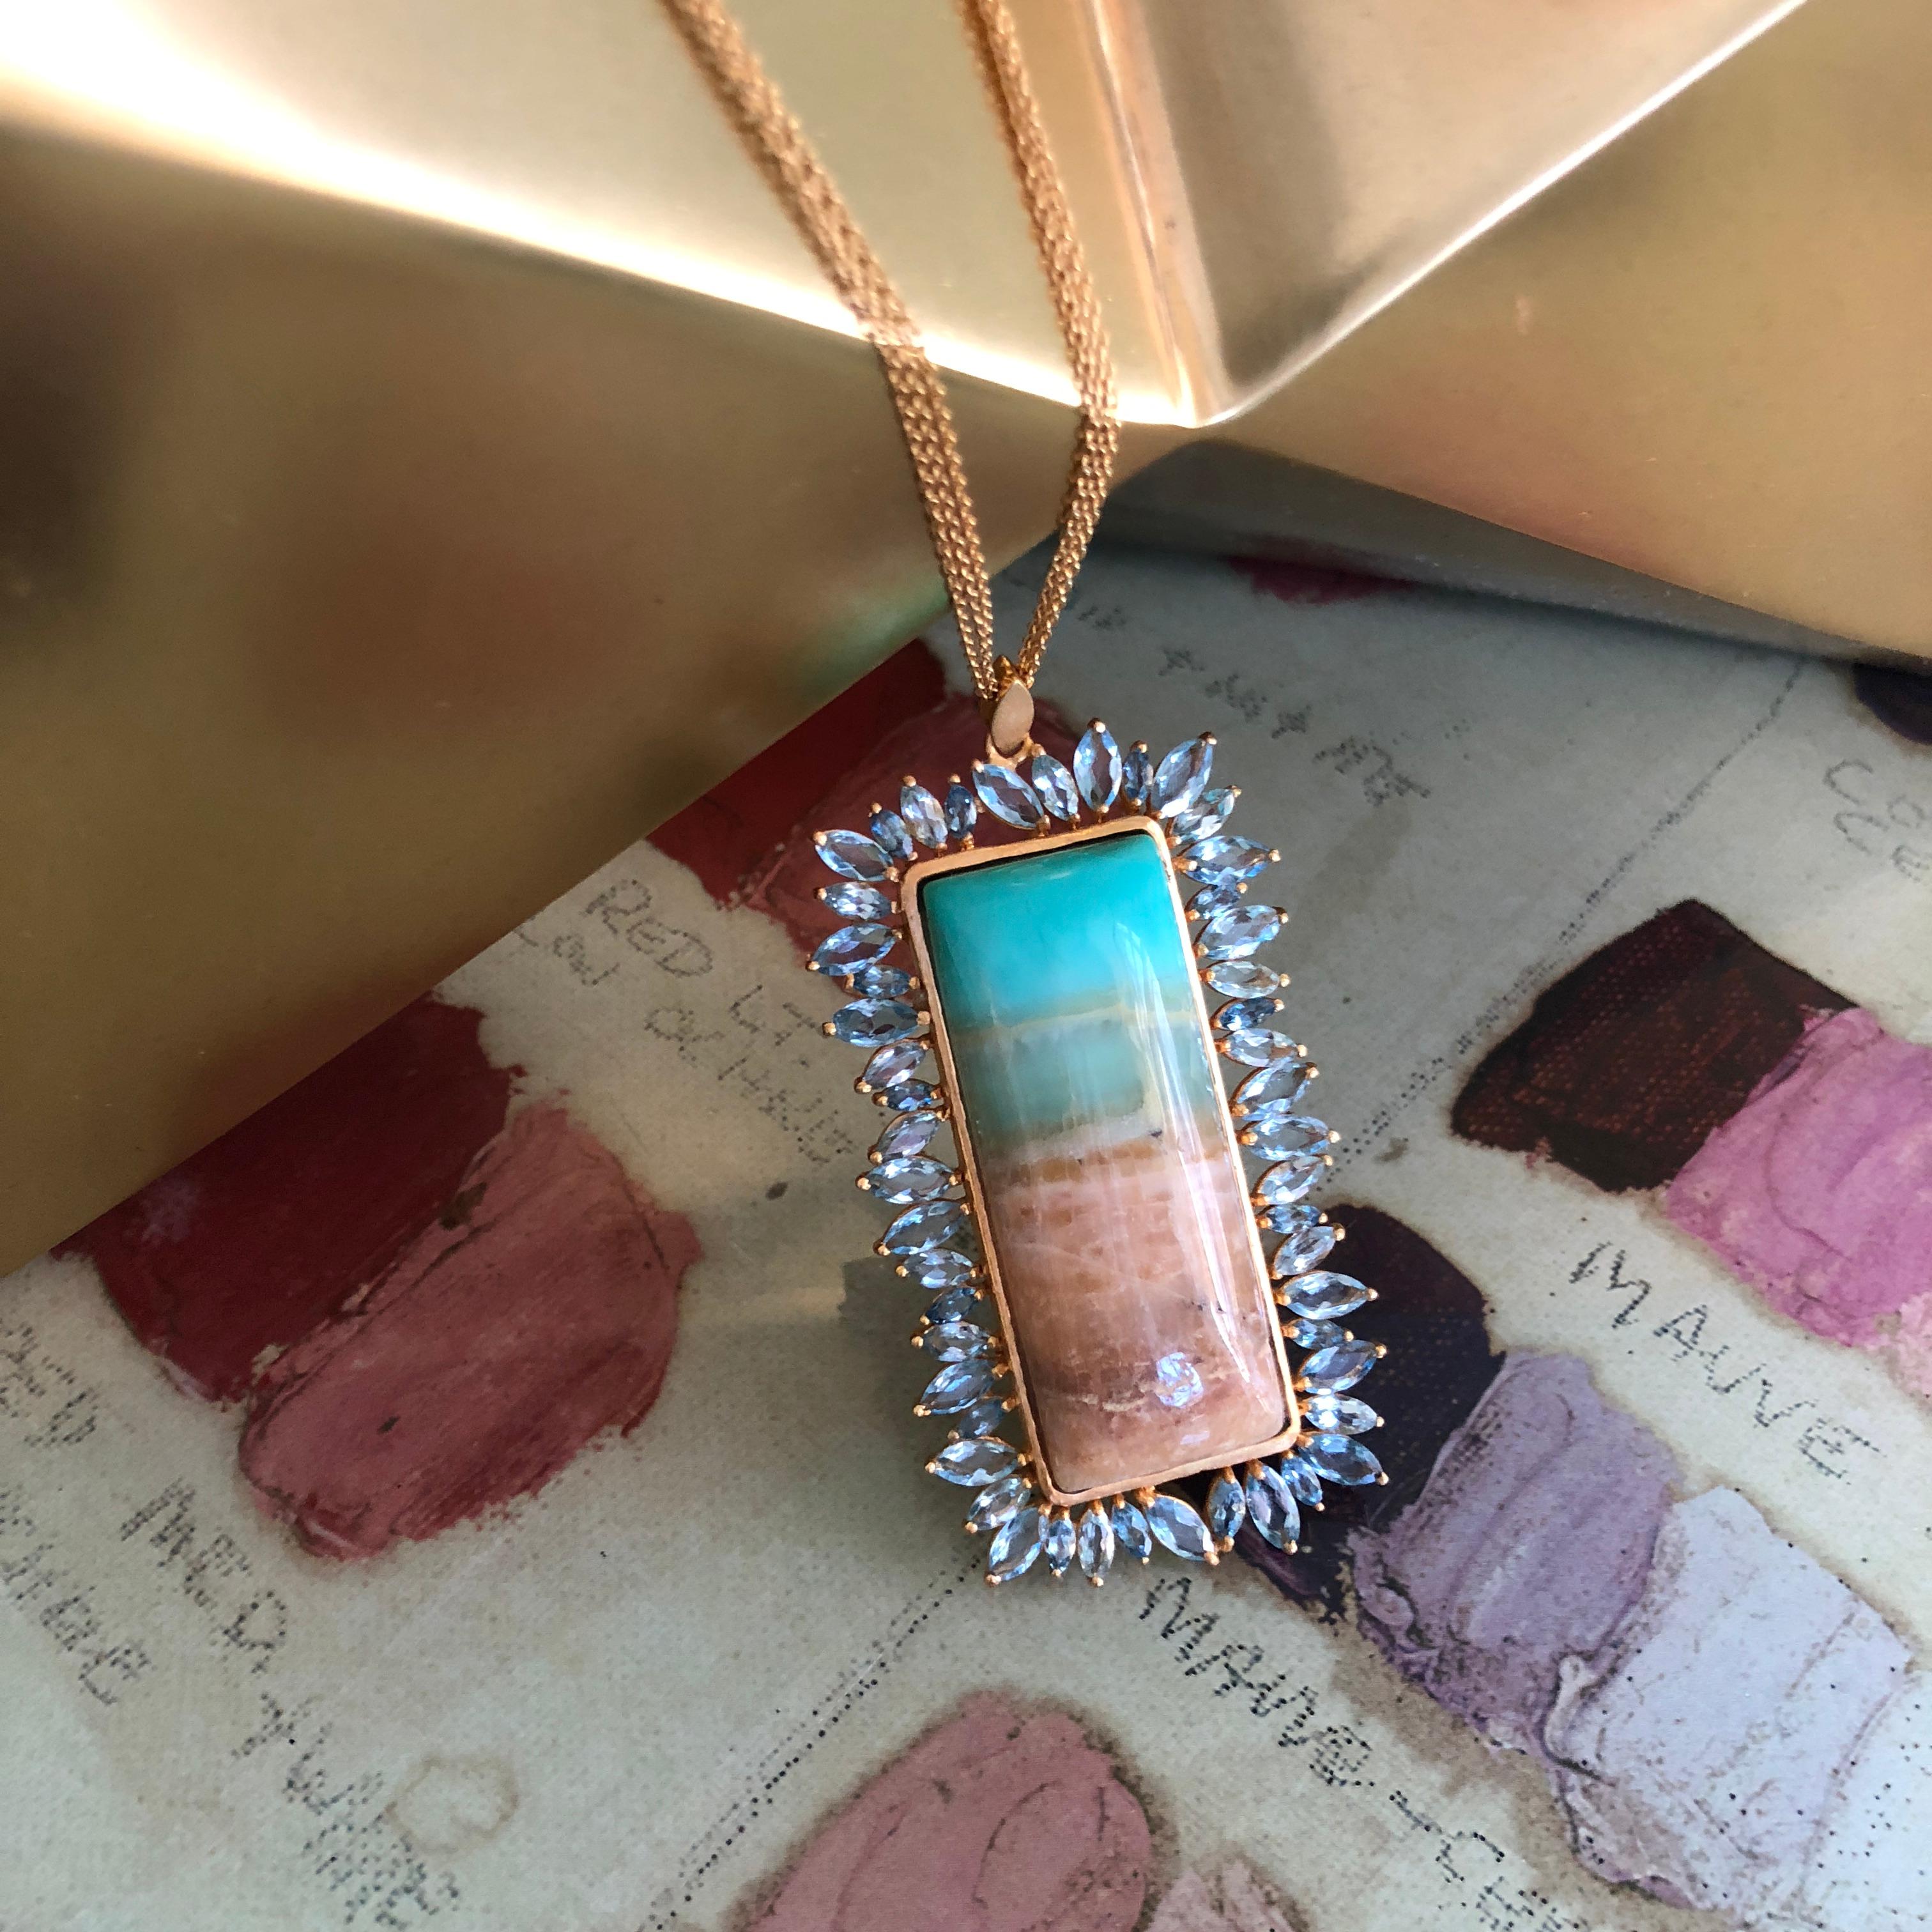 This one of a kind pendant is truly spectacular.  Faceted marquis shaped Aquamarines surround a one of a kind Fossilized Opalized Wood cabachon that has a landscape-like feel to its pattern.  The pendant hangs on a 28 inch chain that is made of 3